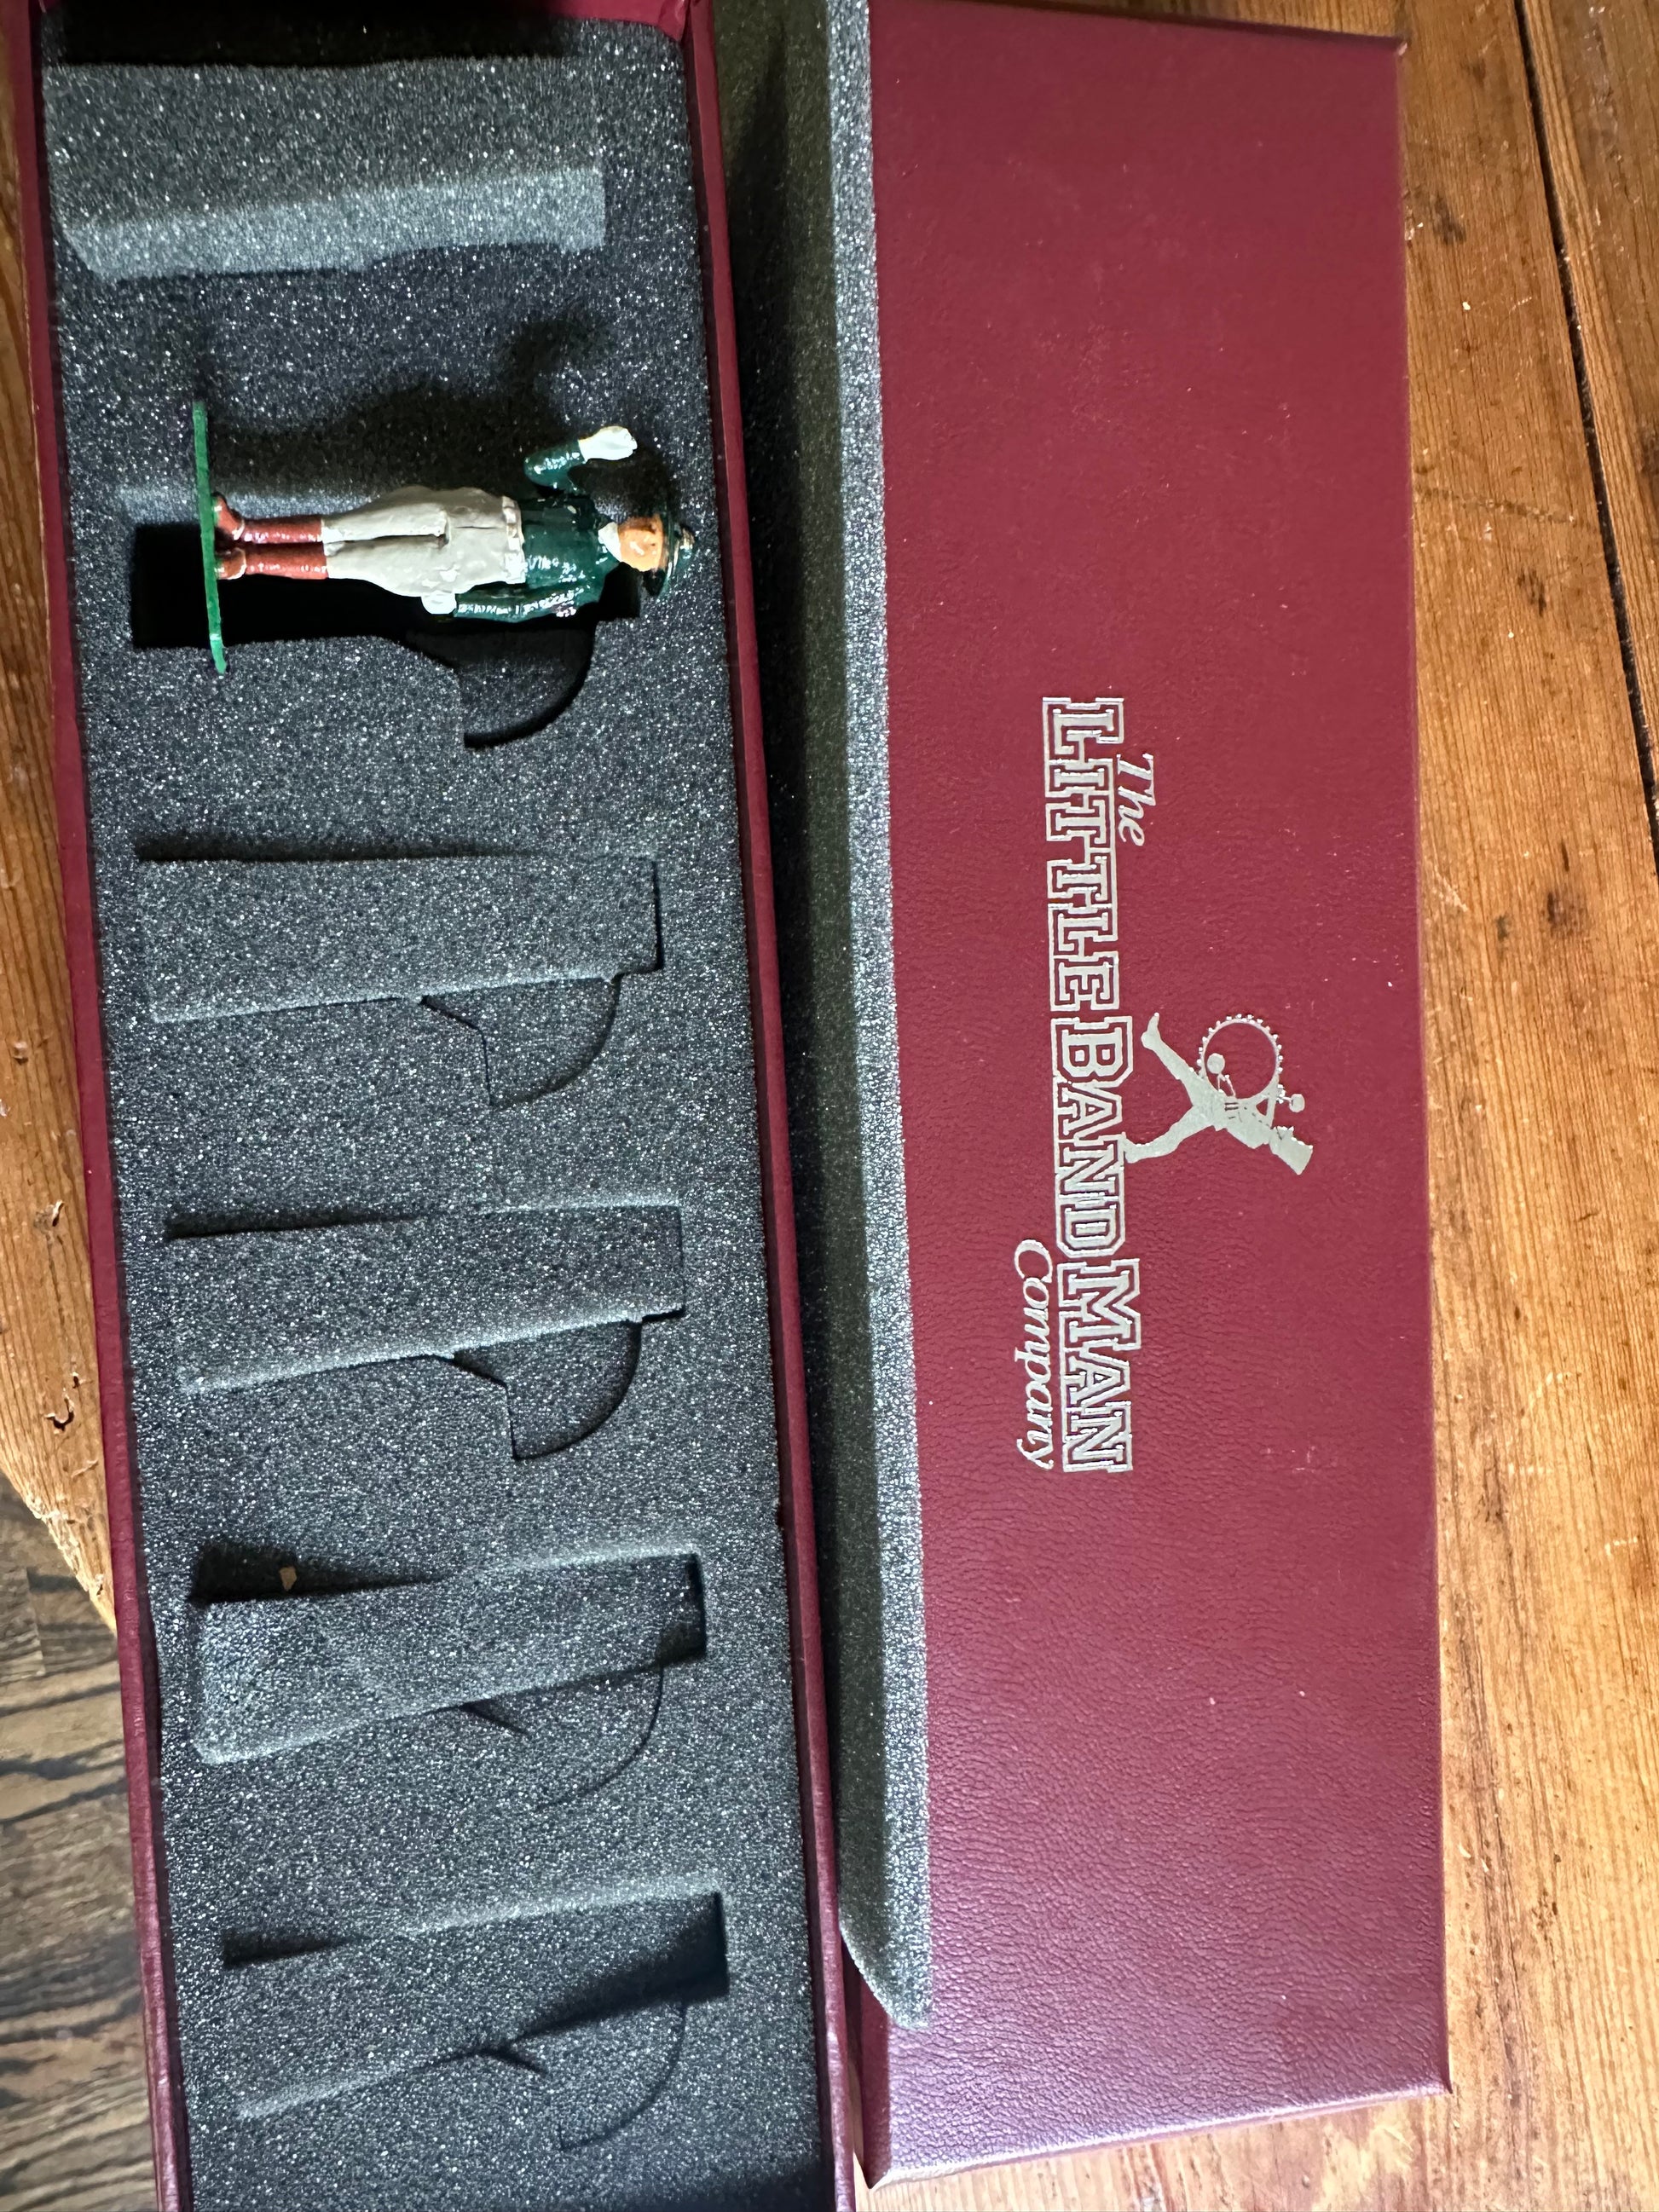 Packaging of texas a&m toy soldier set in maroon box.